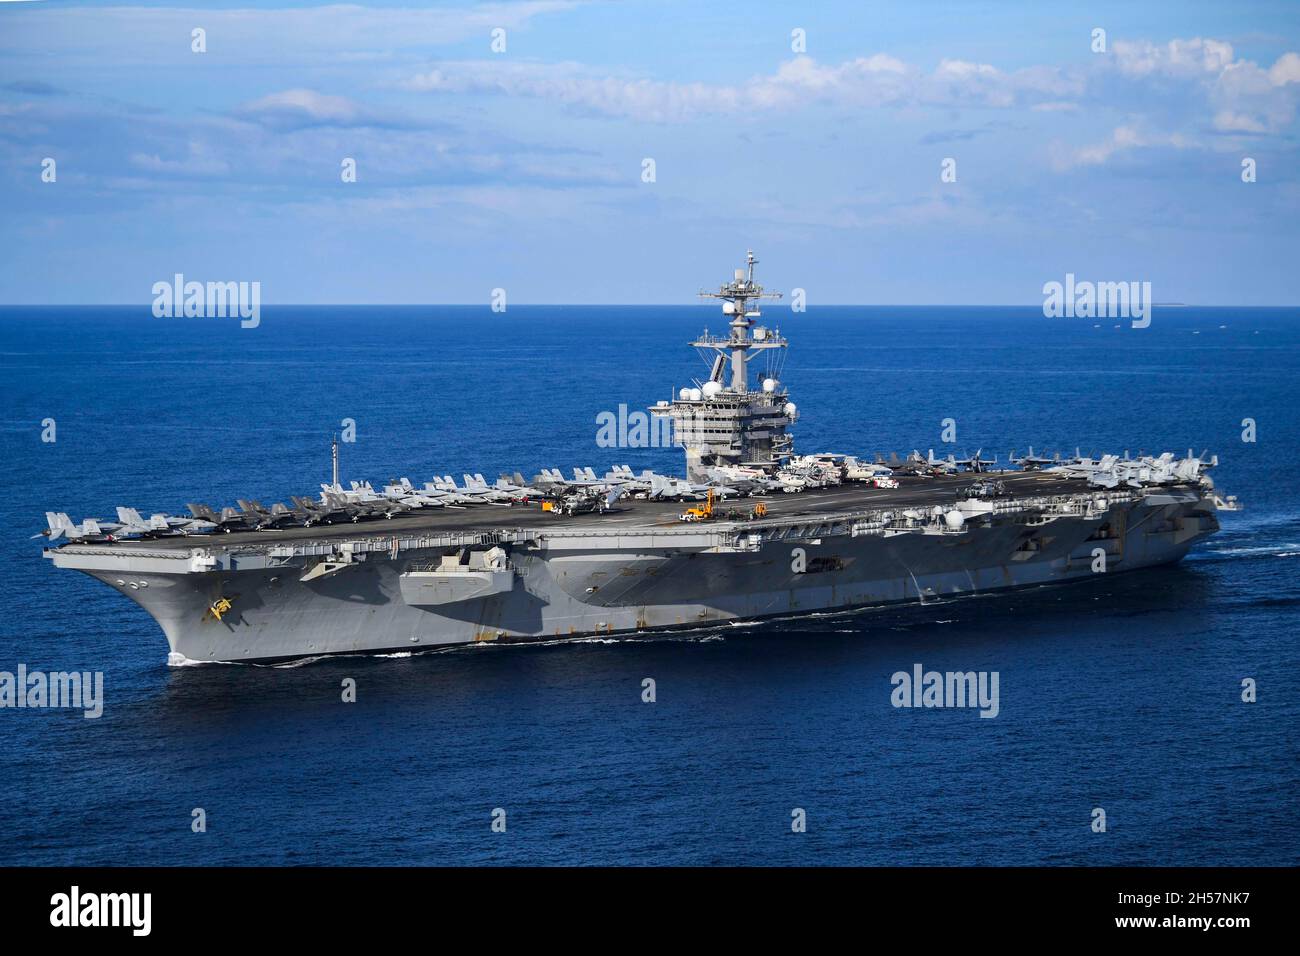 South China Sea, United States. 04 November, 2021. The U.S. Navy Nimitz-class aircraft carrier USS Carl Vinson sails in formation during a routine patrol, November 4, 2021 in the South China Sea.  Credit: MC1 Tyler Fraser/U.S. Navy/Alamy Live News Stock Photo